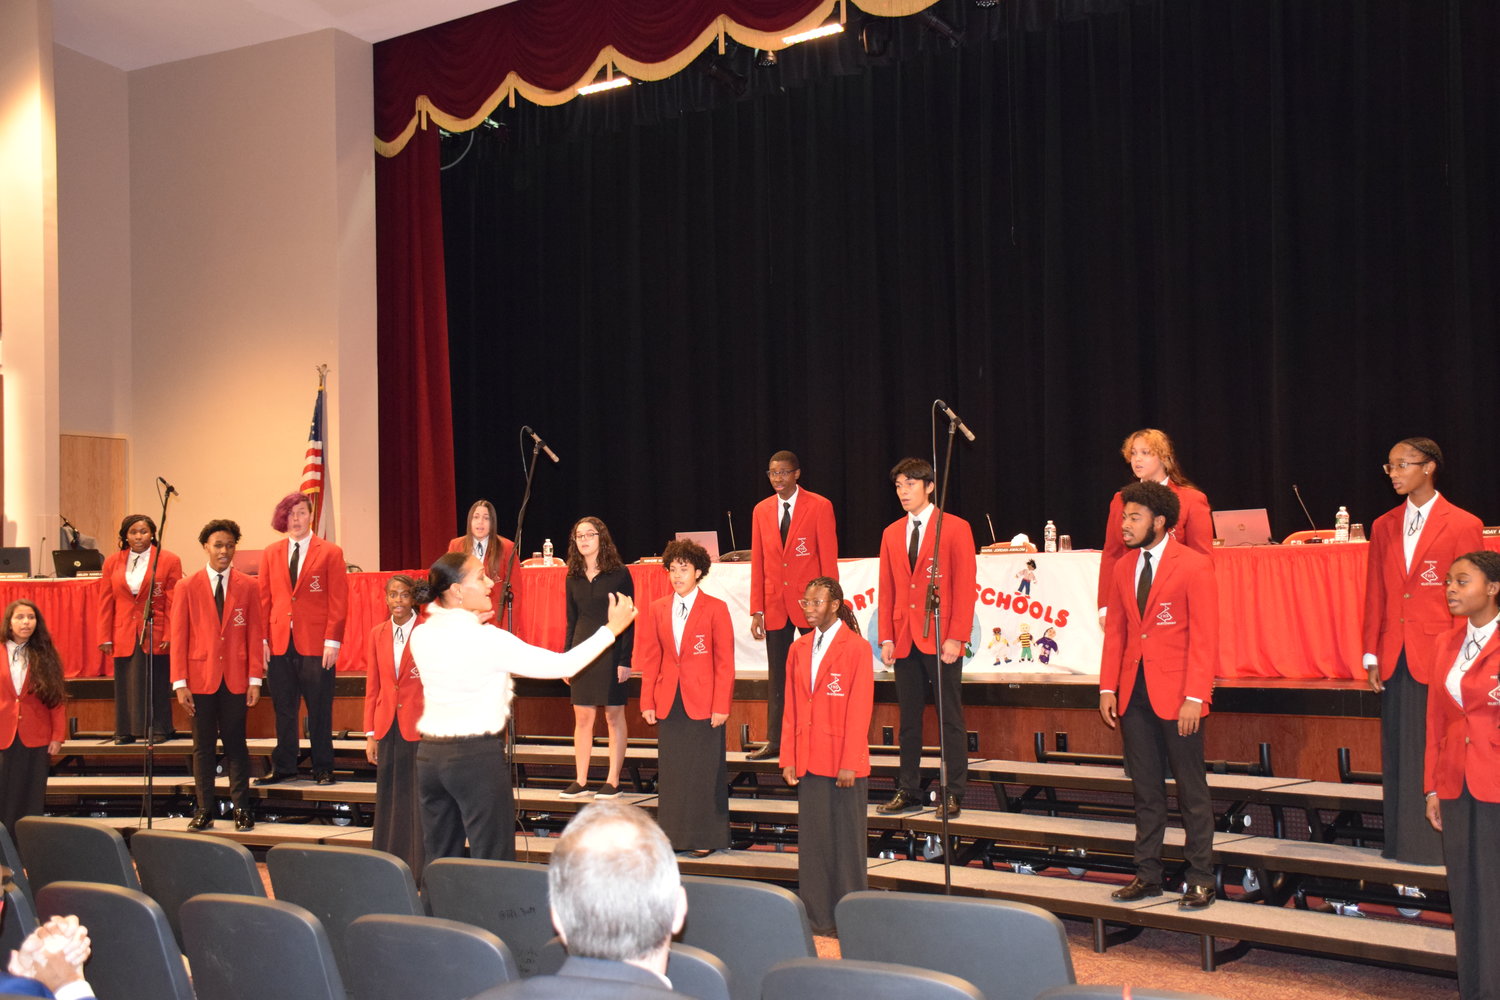 The Freeport High School Chorale performed at the Dec. 8 Freeport Board of Education Meeting.